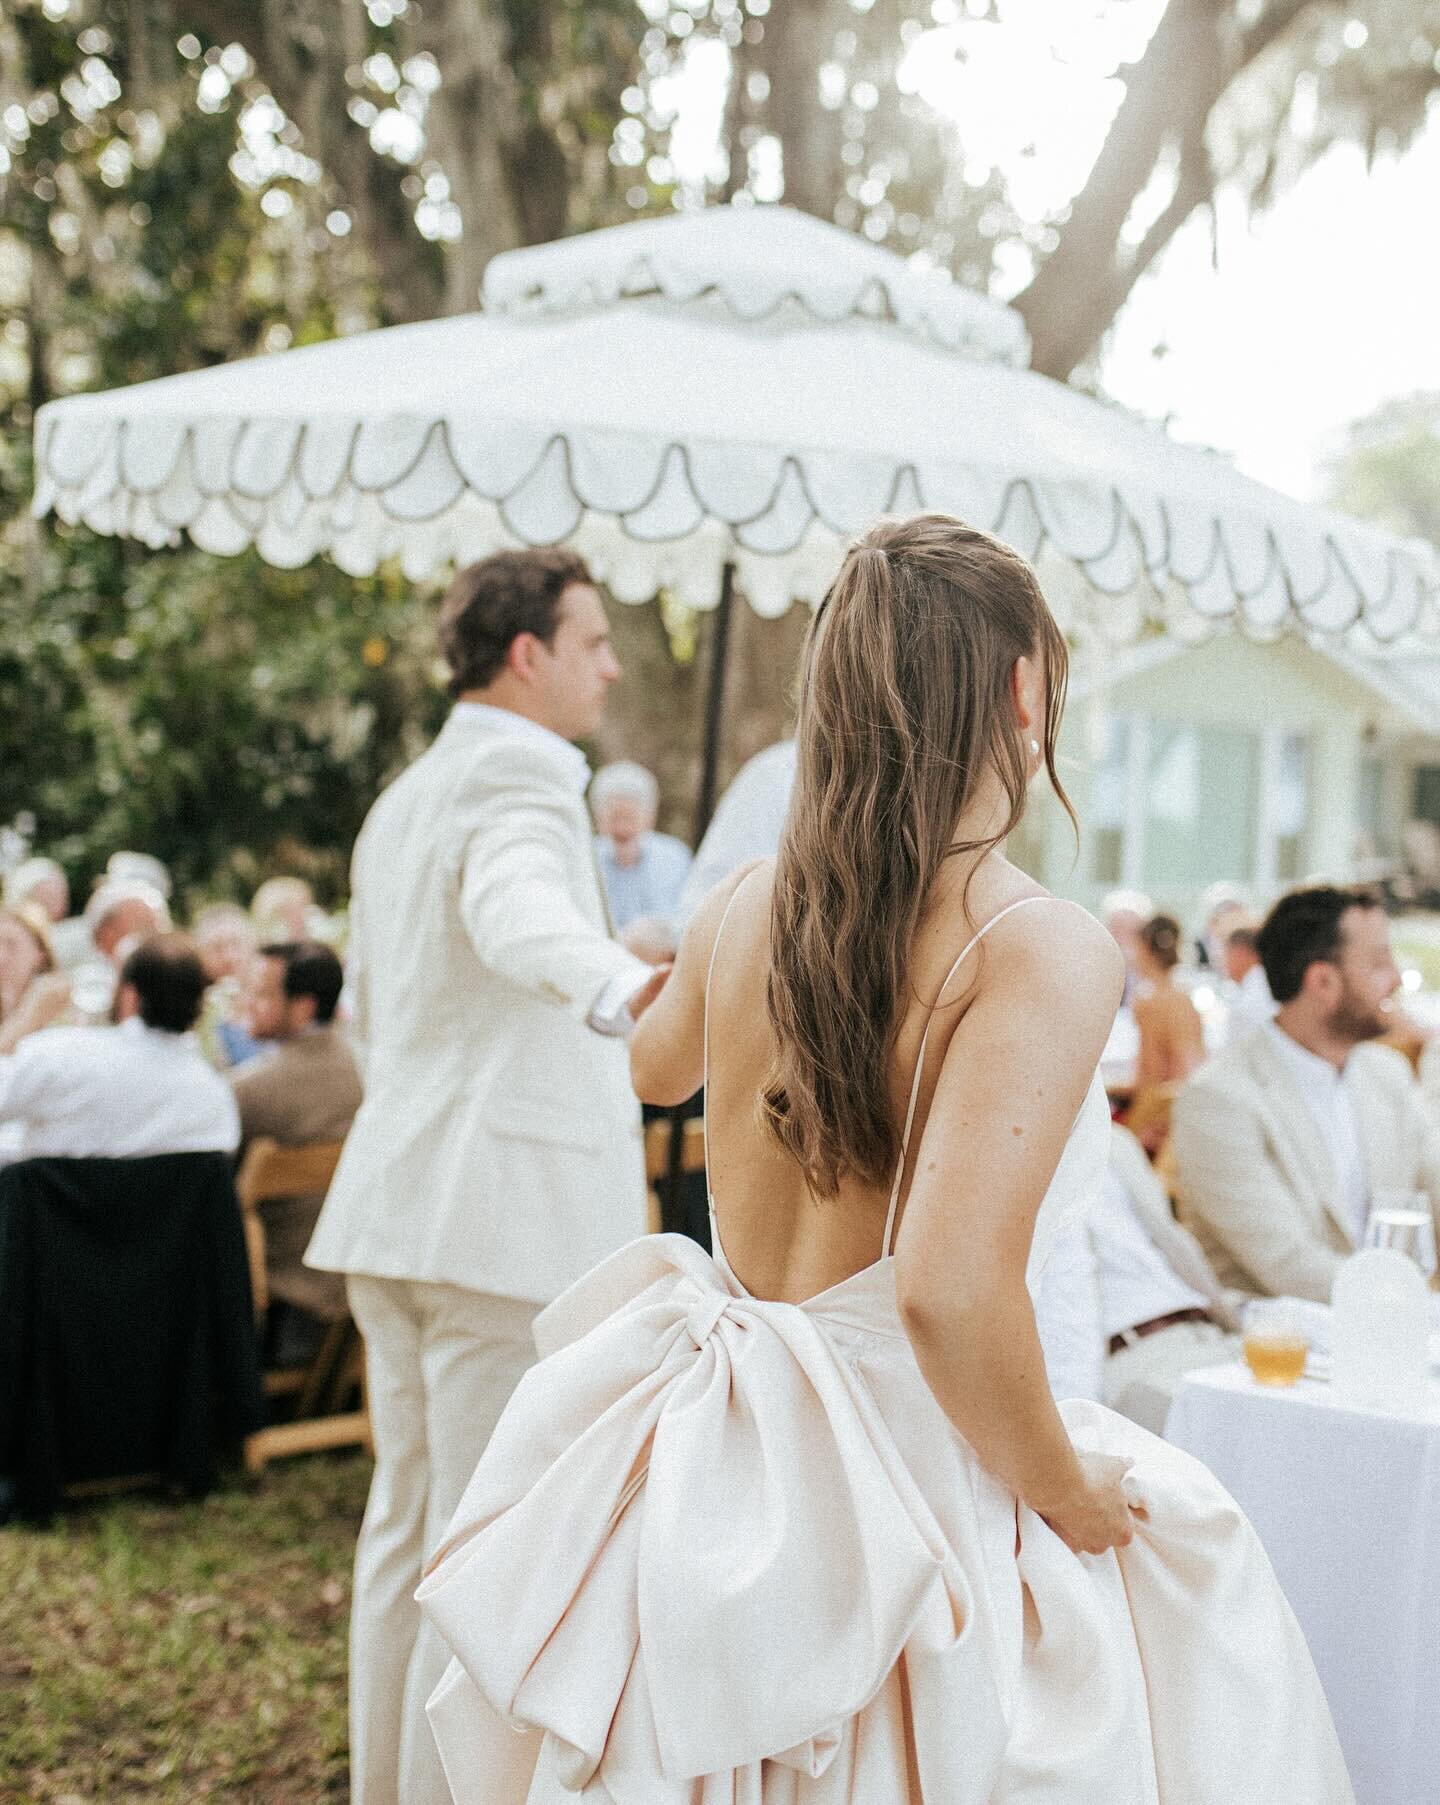 Weddings on private properties are so special. We loved celebrating this day at the same spot our bride grew up visiting her grandparents on the Beaufort coast. 
&thinsp;&thinsp;
The nostalgia, family treasures + more memories made. 
&thinsp;&thinsp;